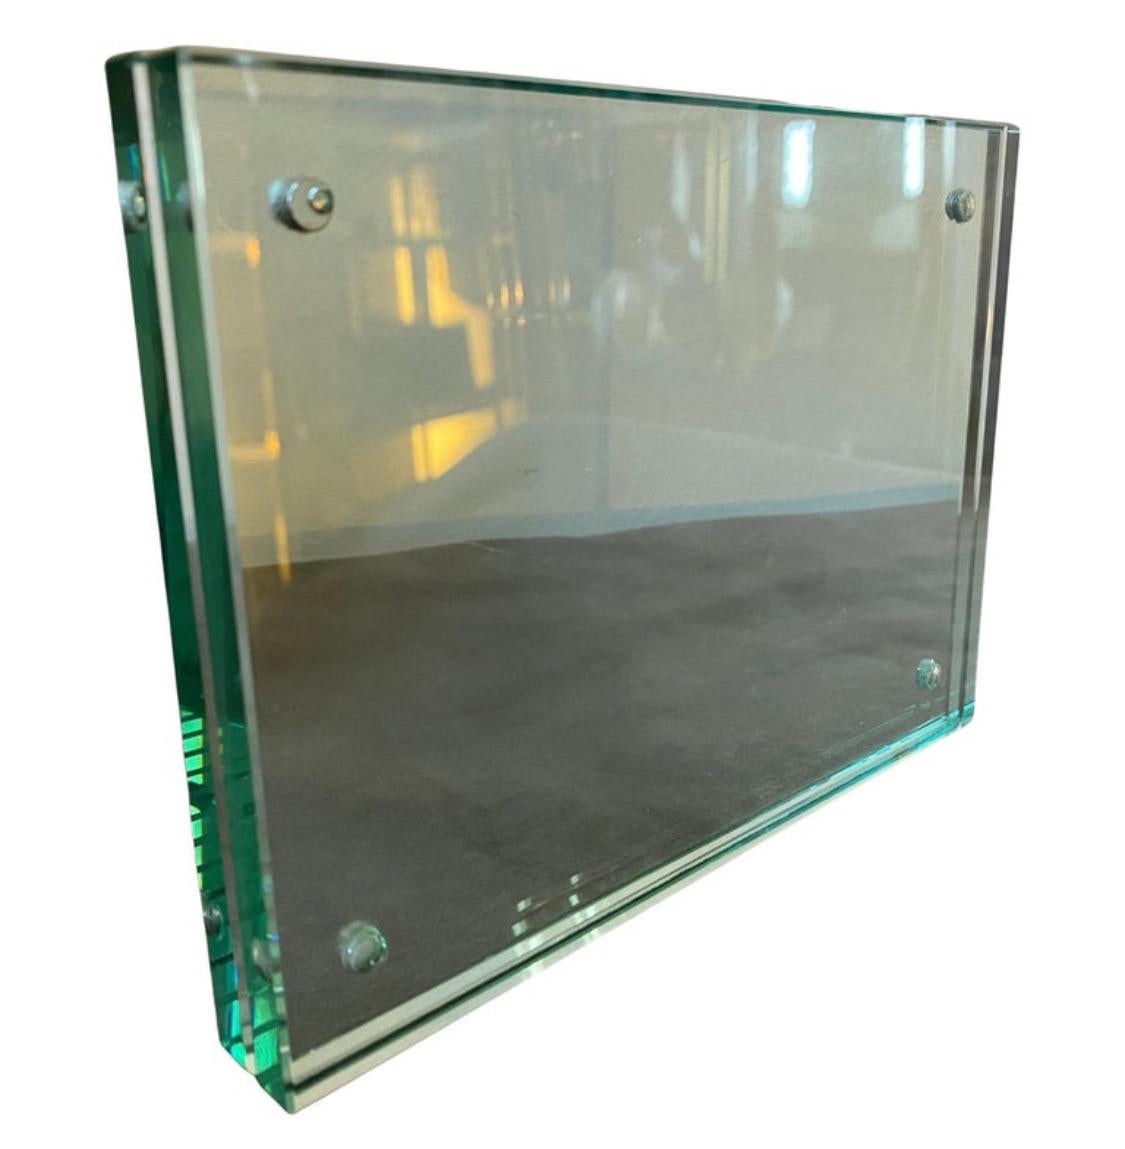 An elegant Mid-Century Modern heavy verde Nilo glass rectangular picture frame designed and manufactured in Italy, quality of glass and cleanliness and rigor of its lines suggests that it was built by Fontana Arte. It's in perfect condition. The